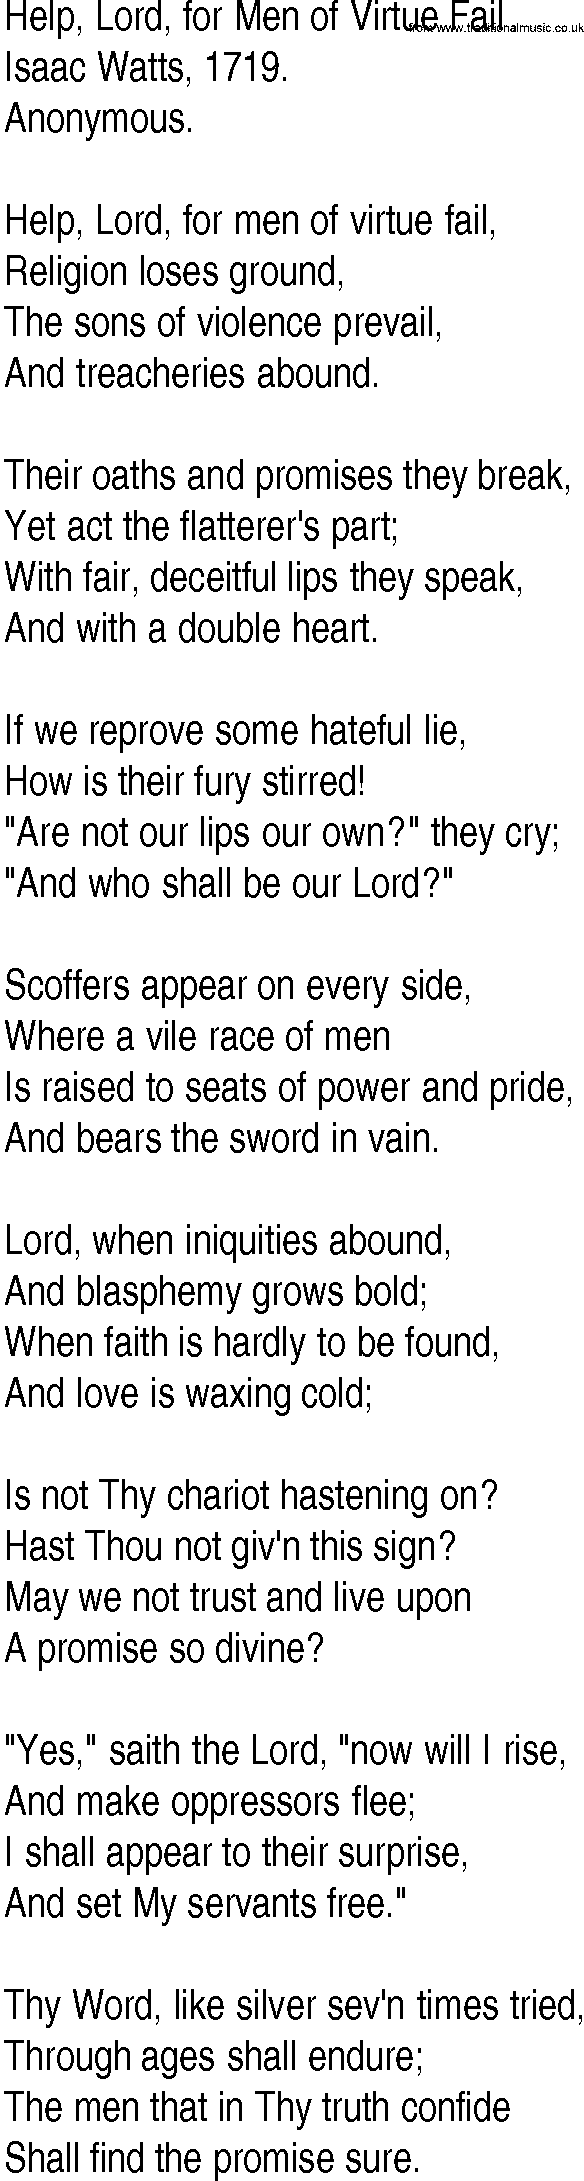 Hymn and Gospel Song: Help, Lord, for Men of Virtue Fail by Isaac Watts lyrics